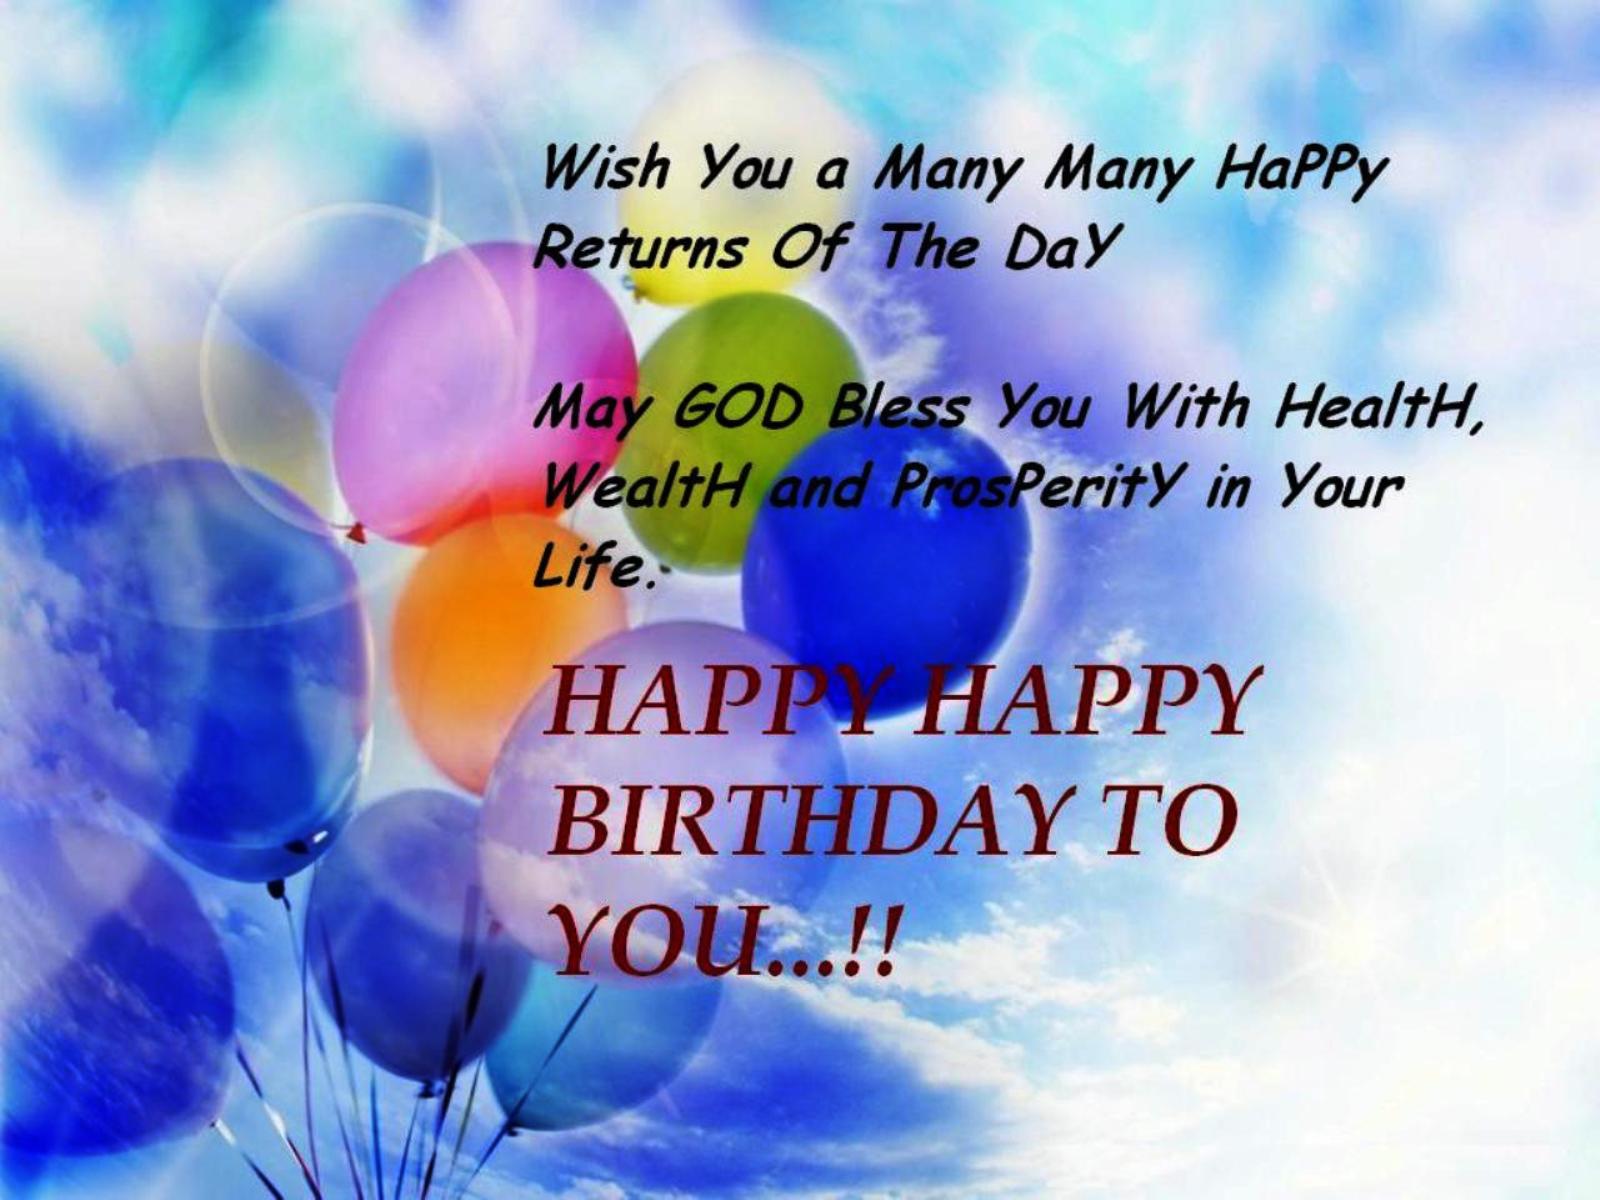 Happy Birthday Wishes and Birthday Images: Happy birthday wishes quotes for friends